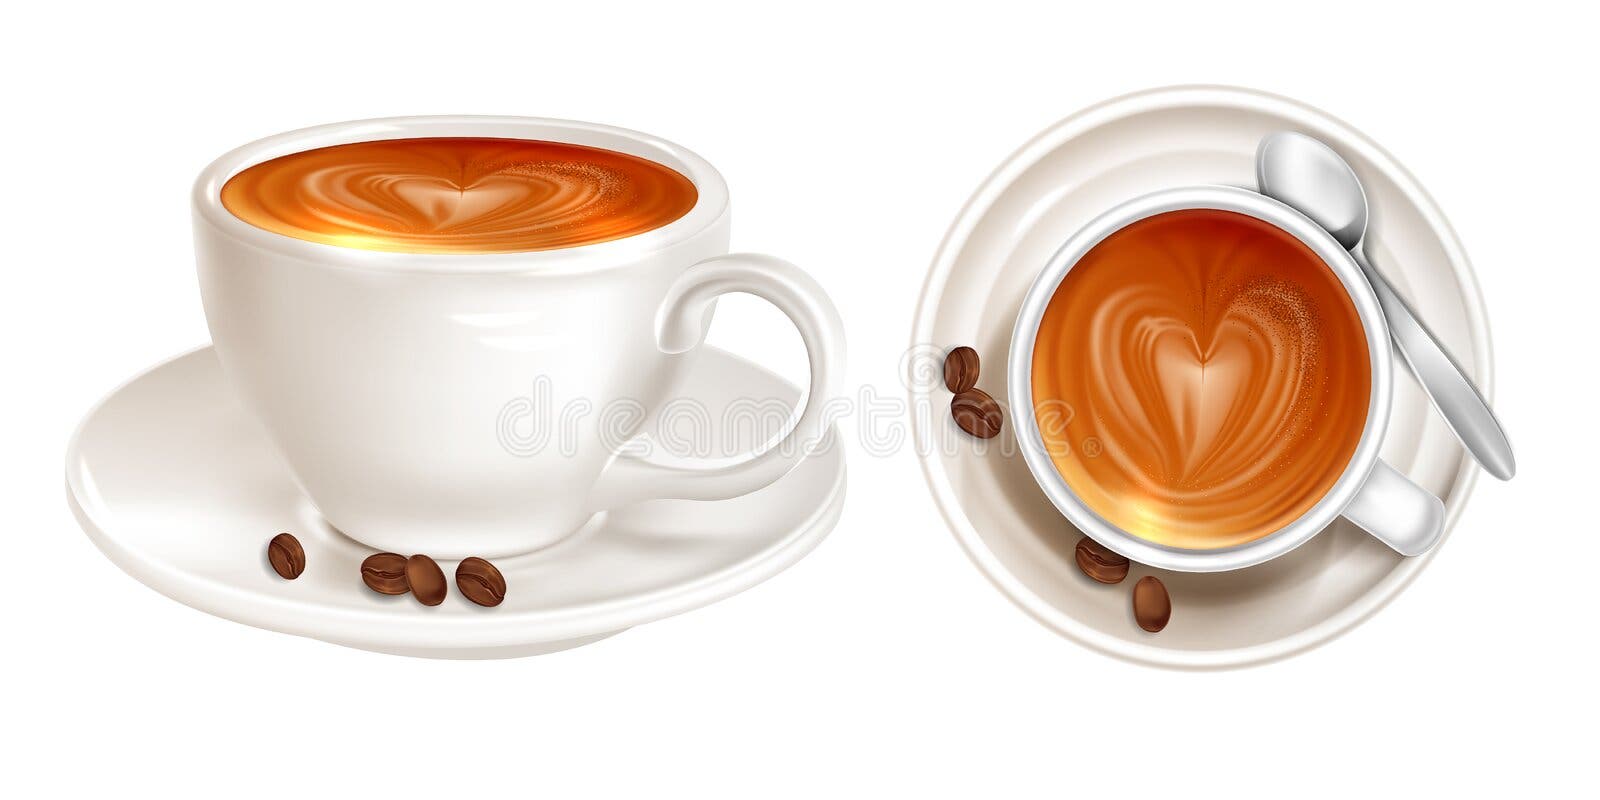 https://thumbs.dreamstime.com/b/latte-pattern-foam-top-side-view-isolated-white-background-realistic-coffee-necessary-accessories-vector-207912647.jpg?w=1600